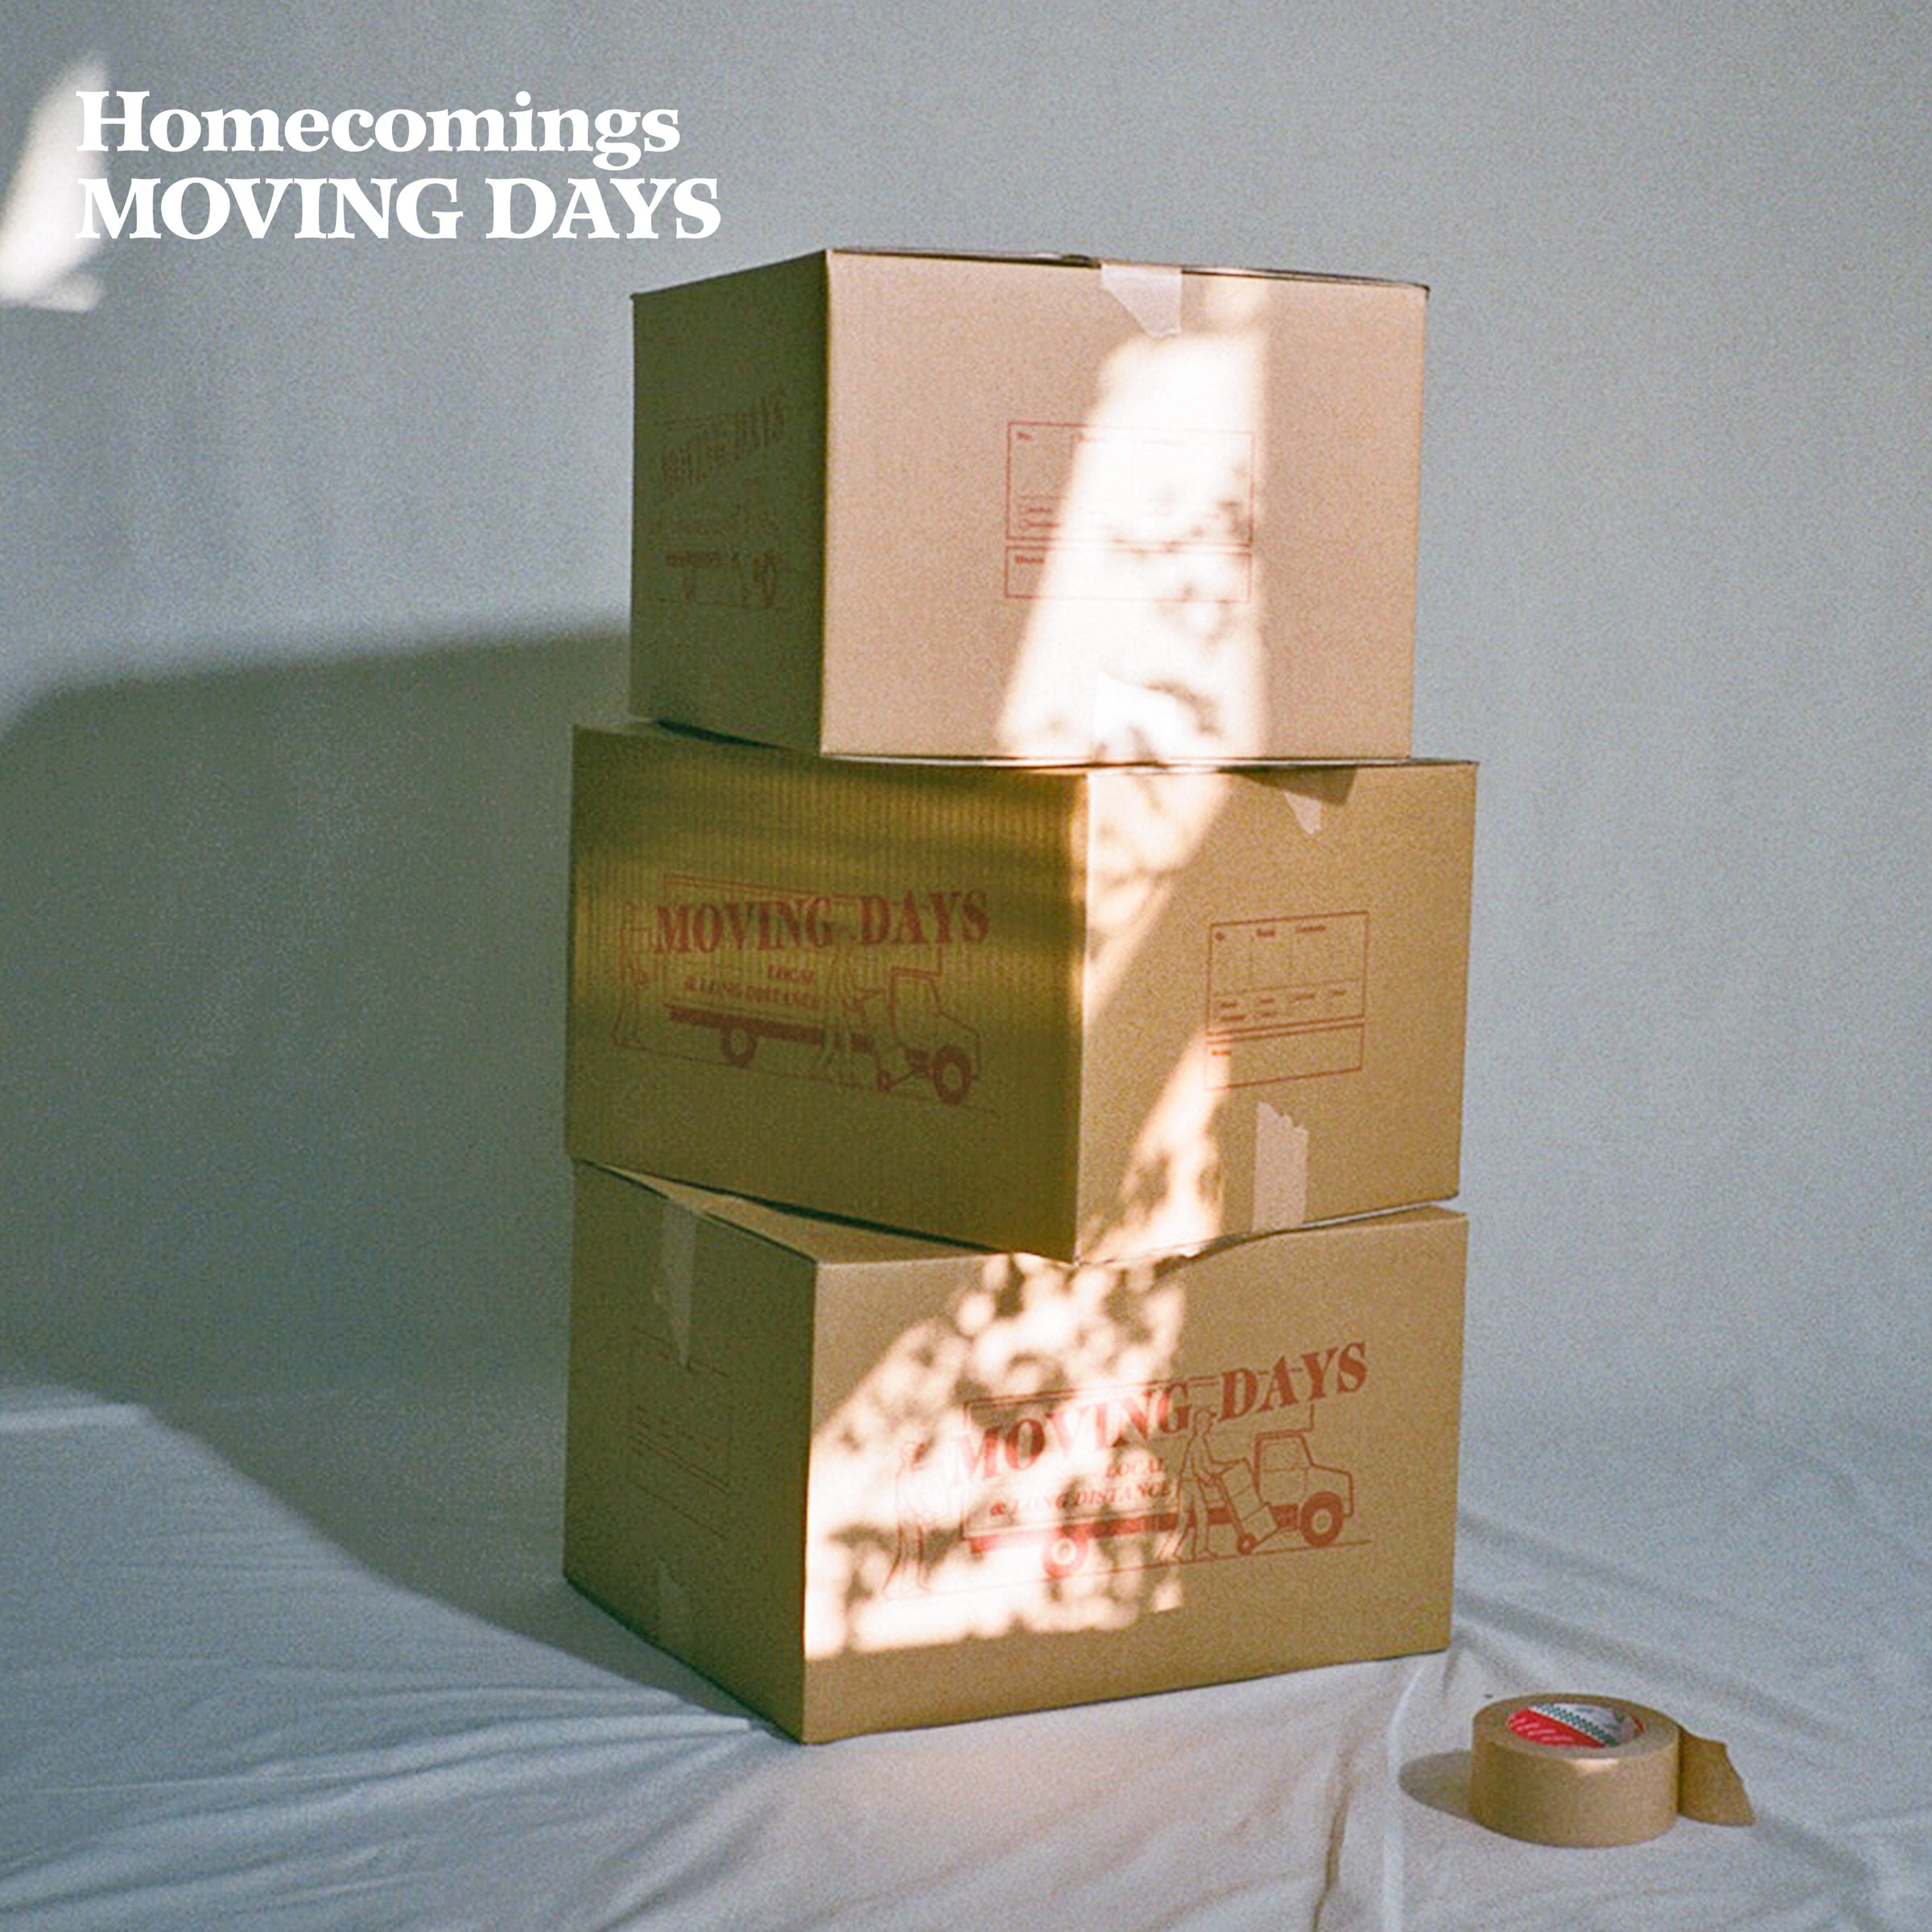 Homecomings - Moving Days (2021-05-12) [FLAC 24bit/96kHz] Download